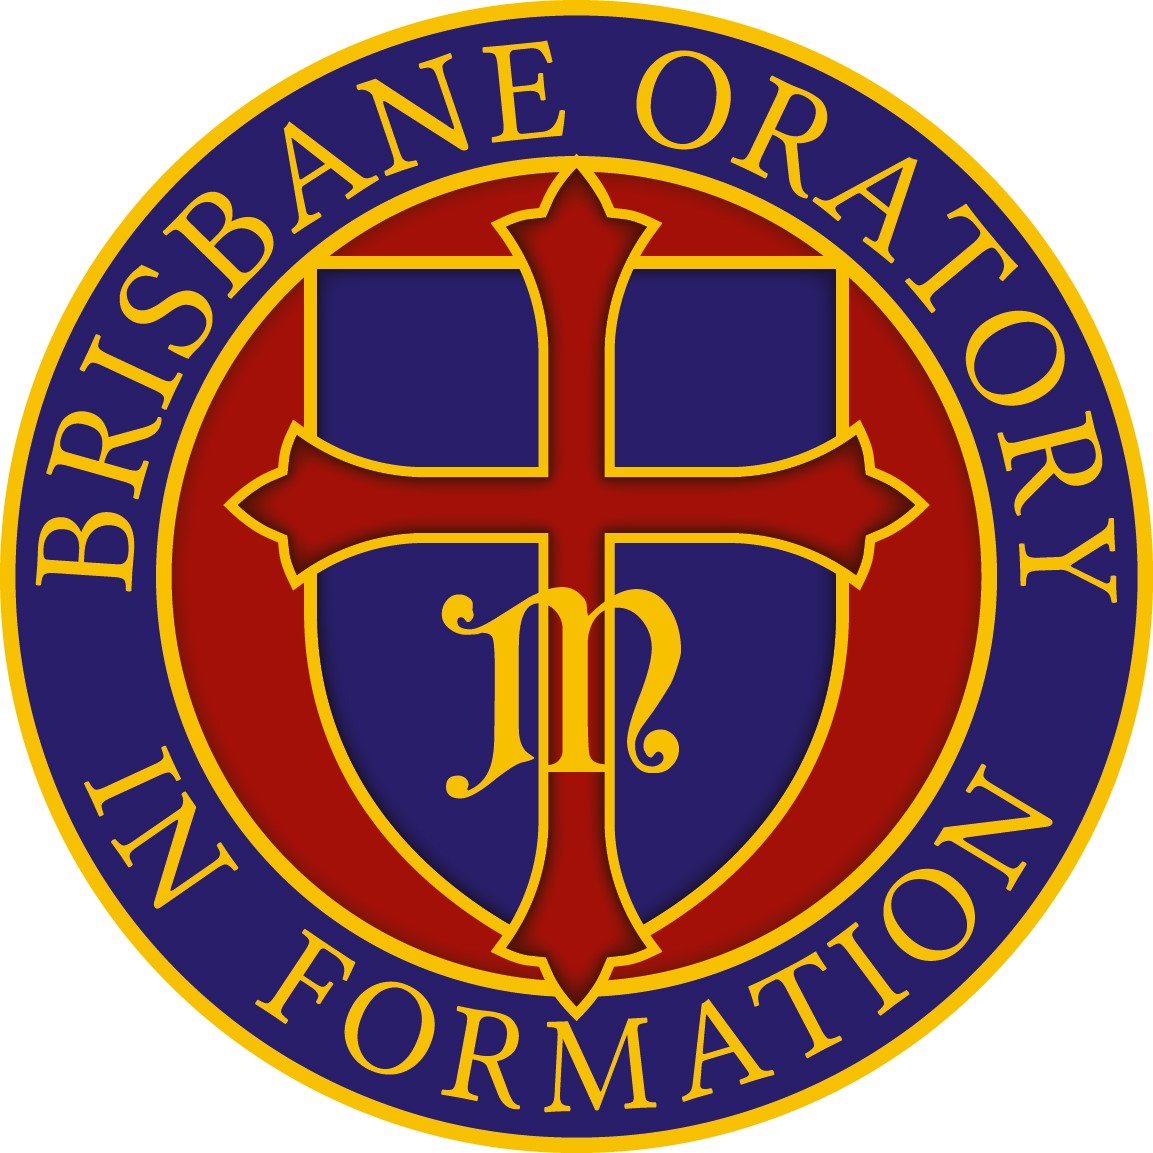 The Brisbane Oratory in Formation